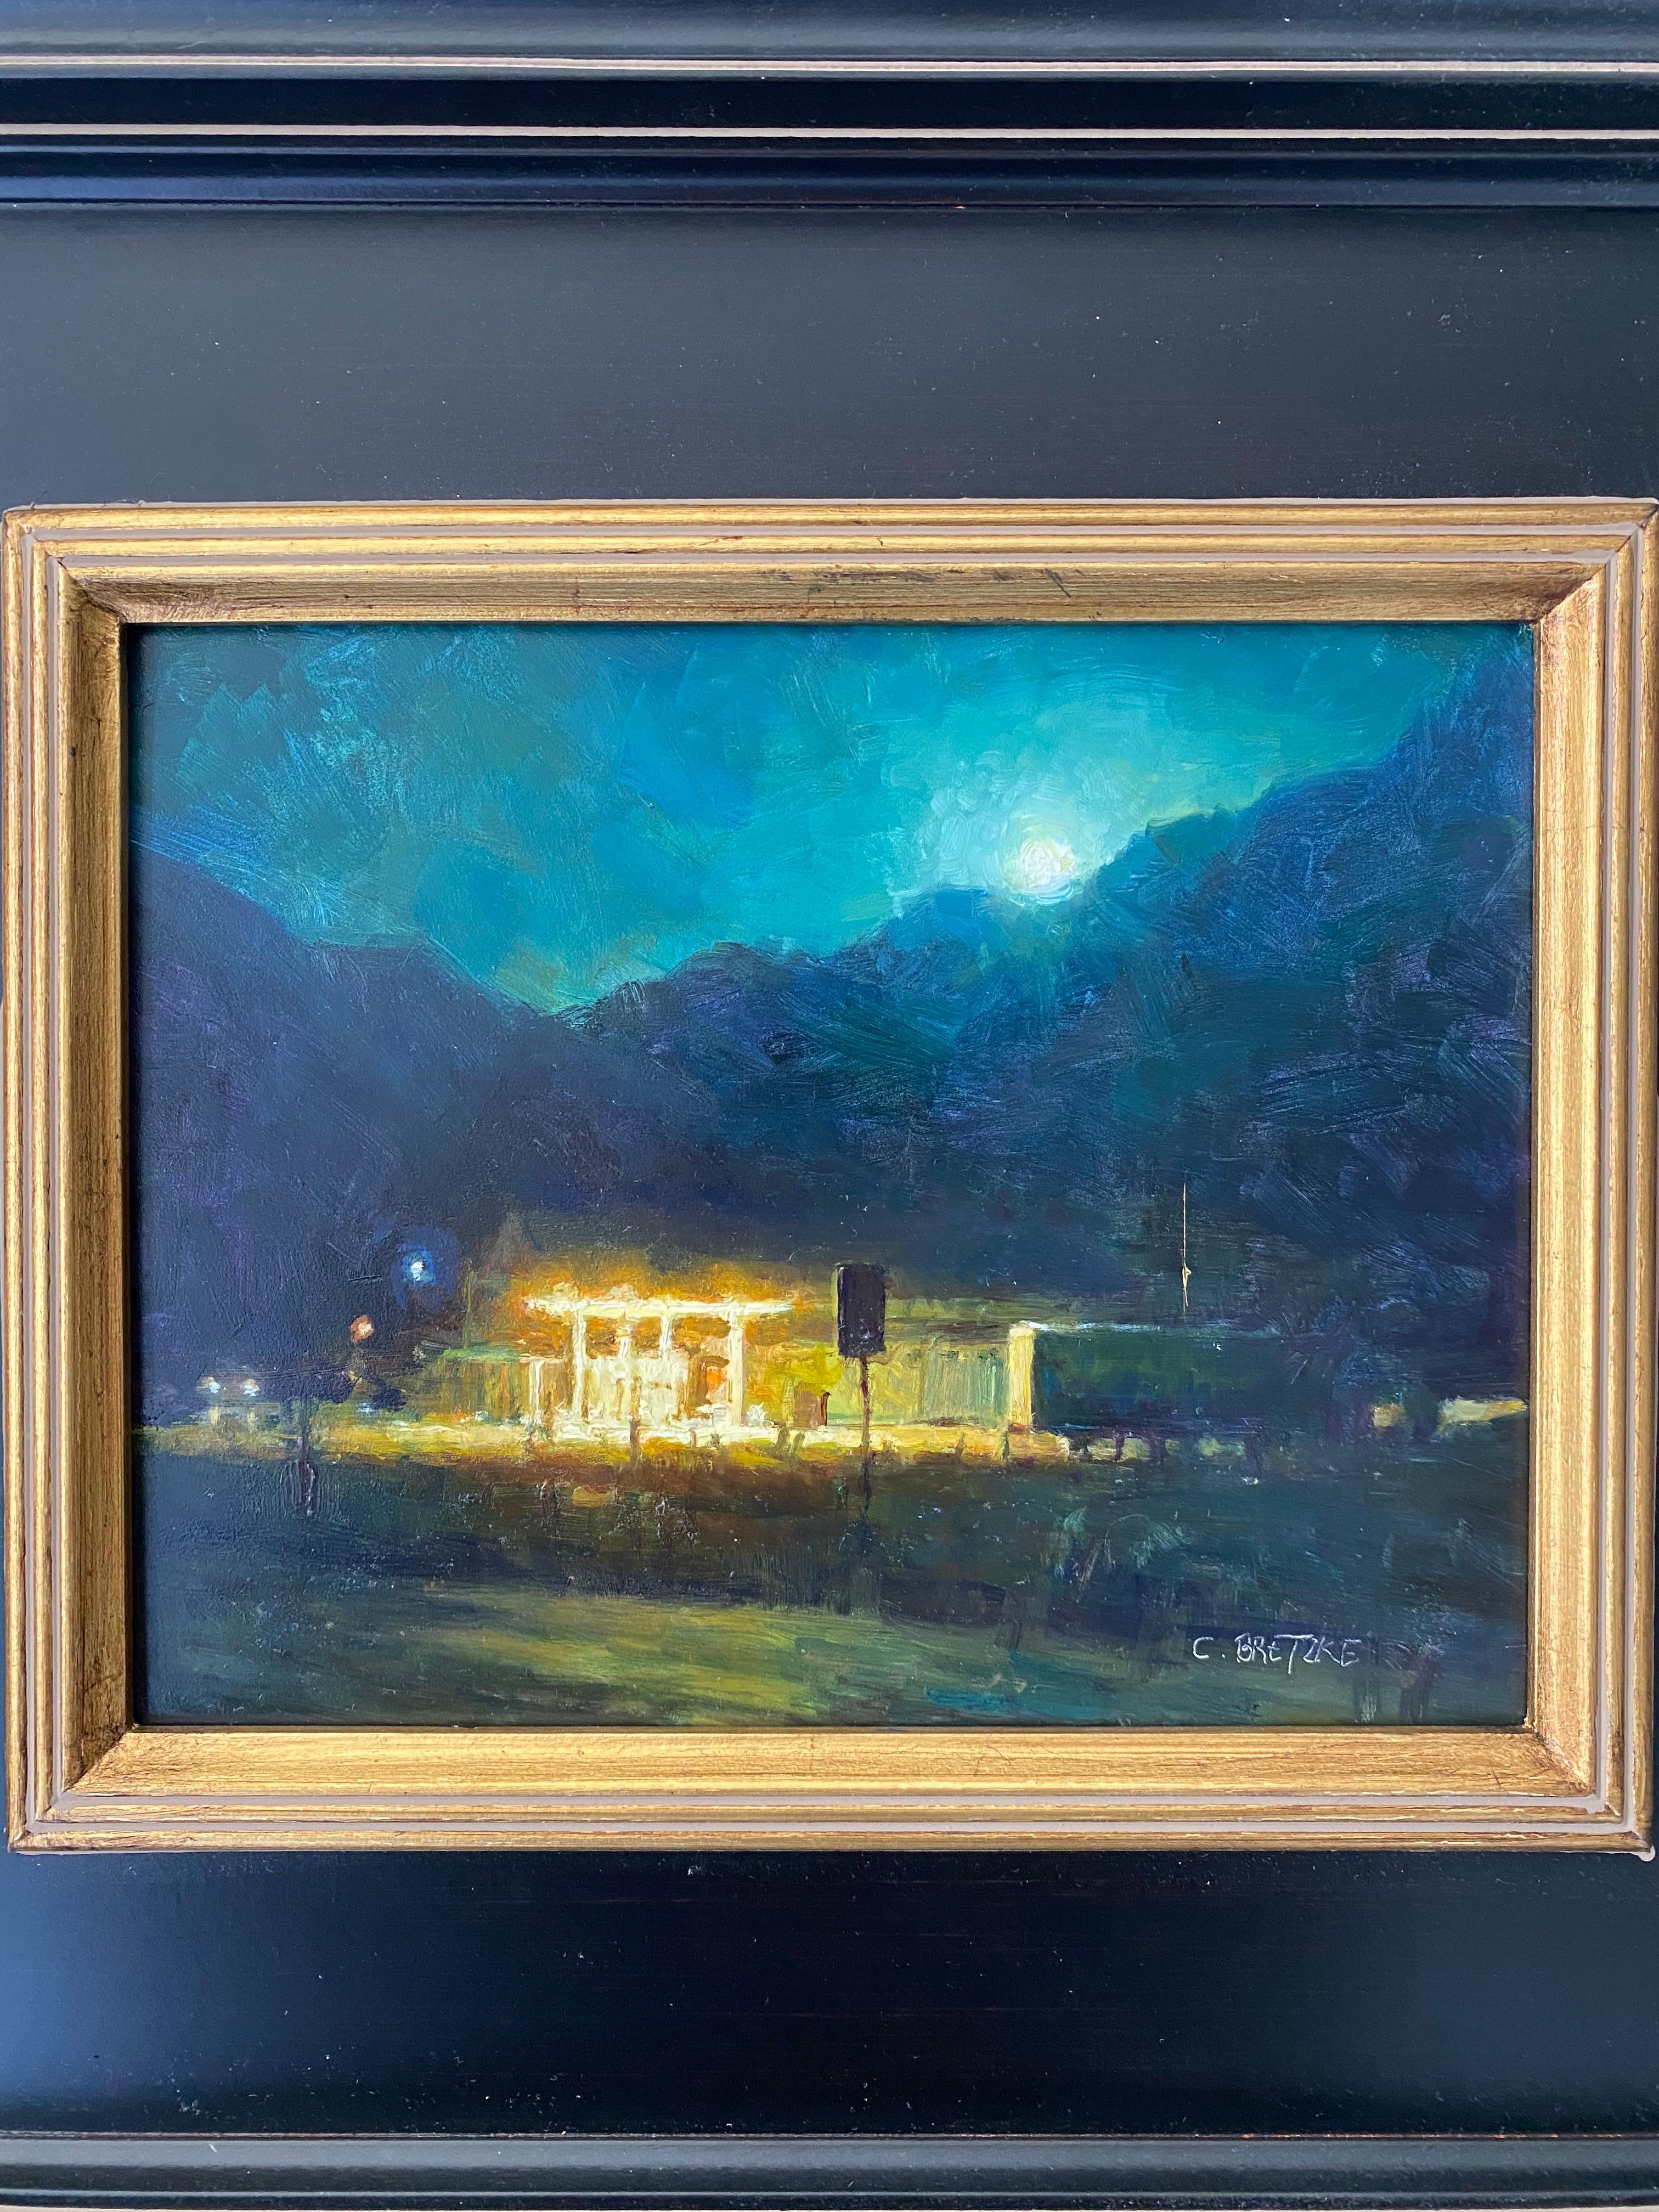 Moon Over Telluride Station - American Realist Painting by Carl Bretzke